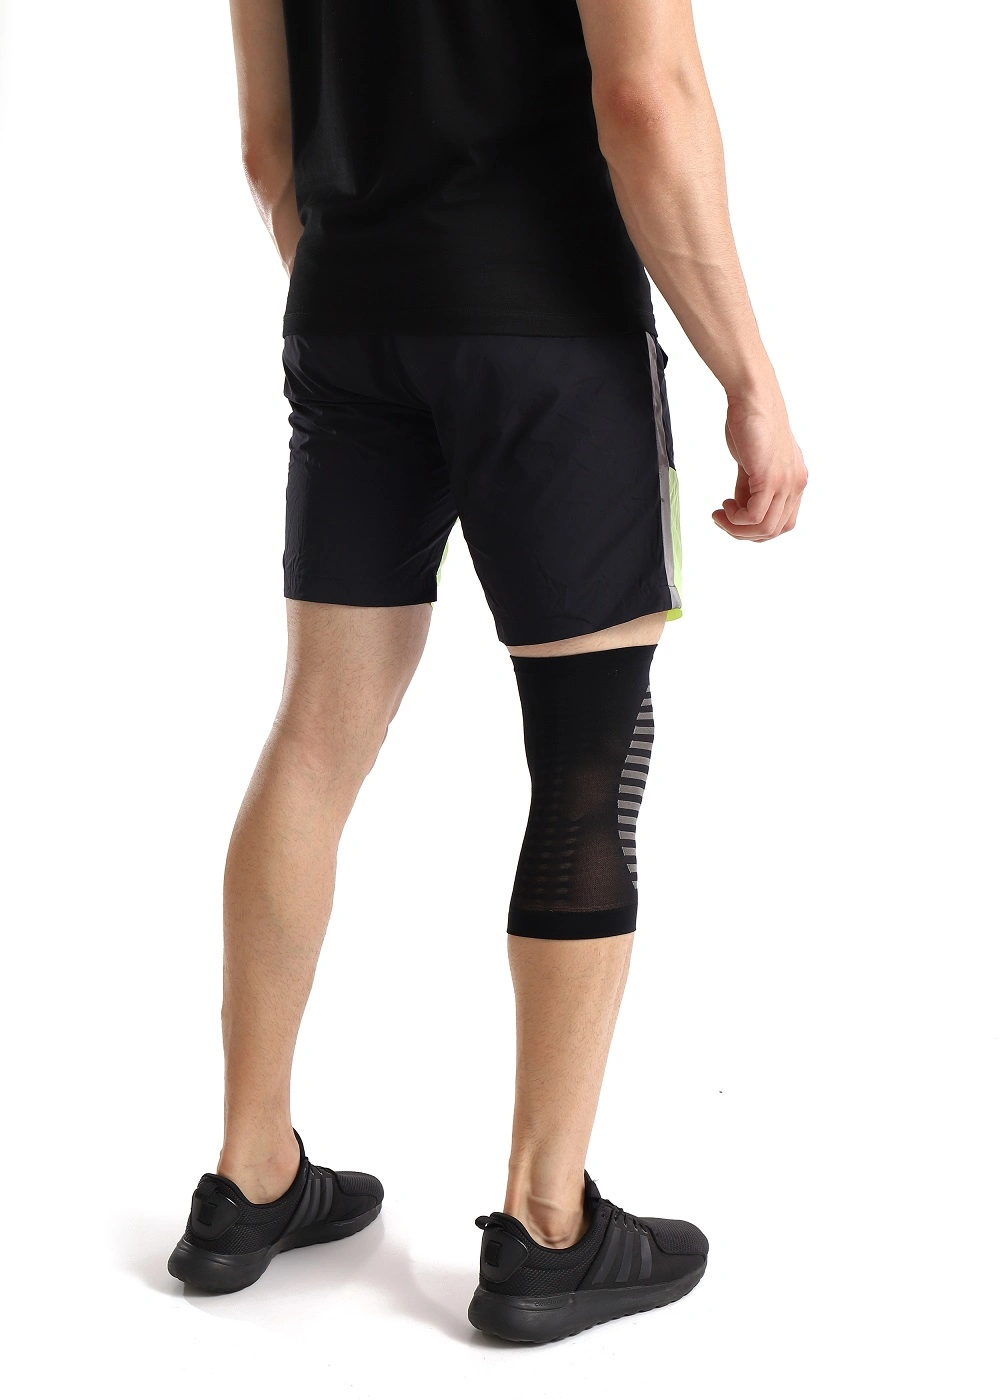 Sports Compression Knee Protector Pad for Men&Women